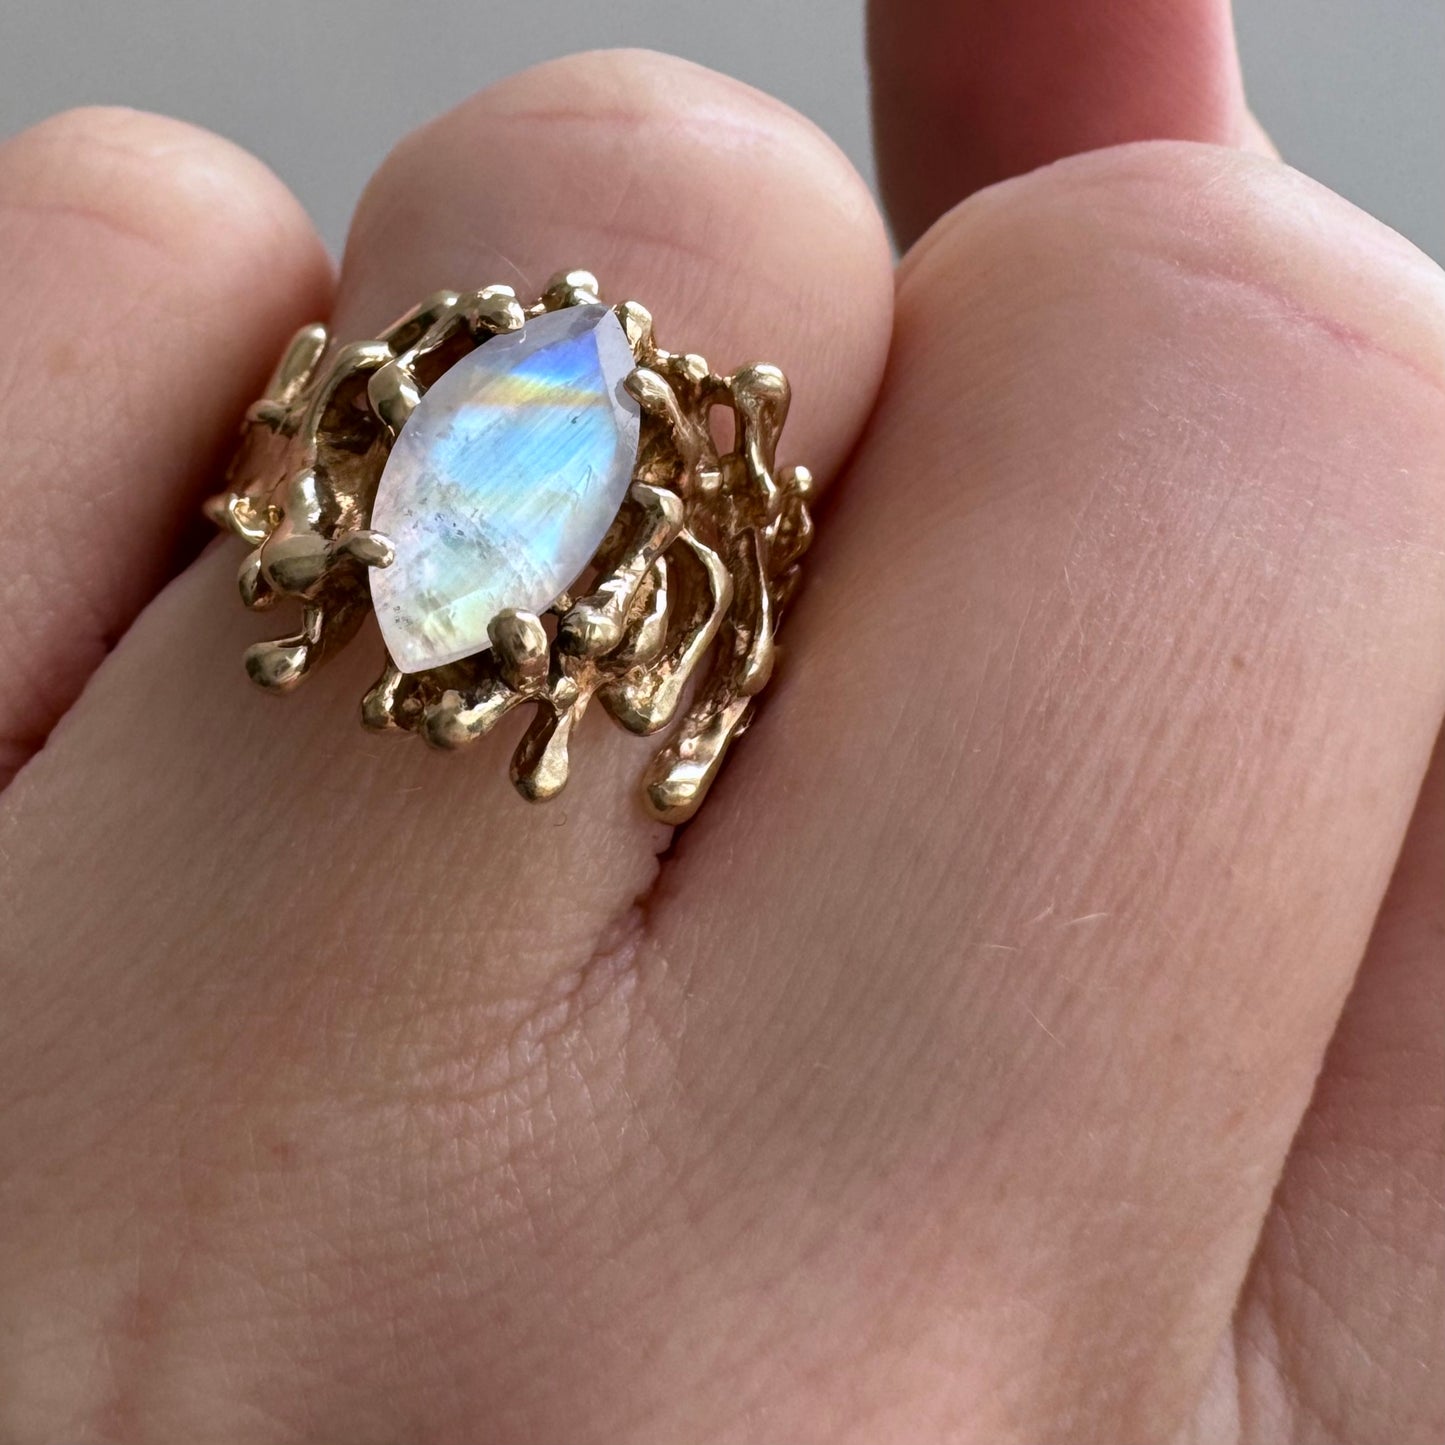 reimagined V I N T A G E // rainbow portal / 10k brutalist ring with rainbow moonstone / size 5.5